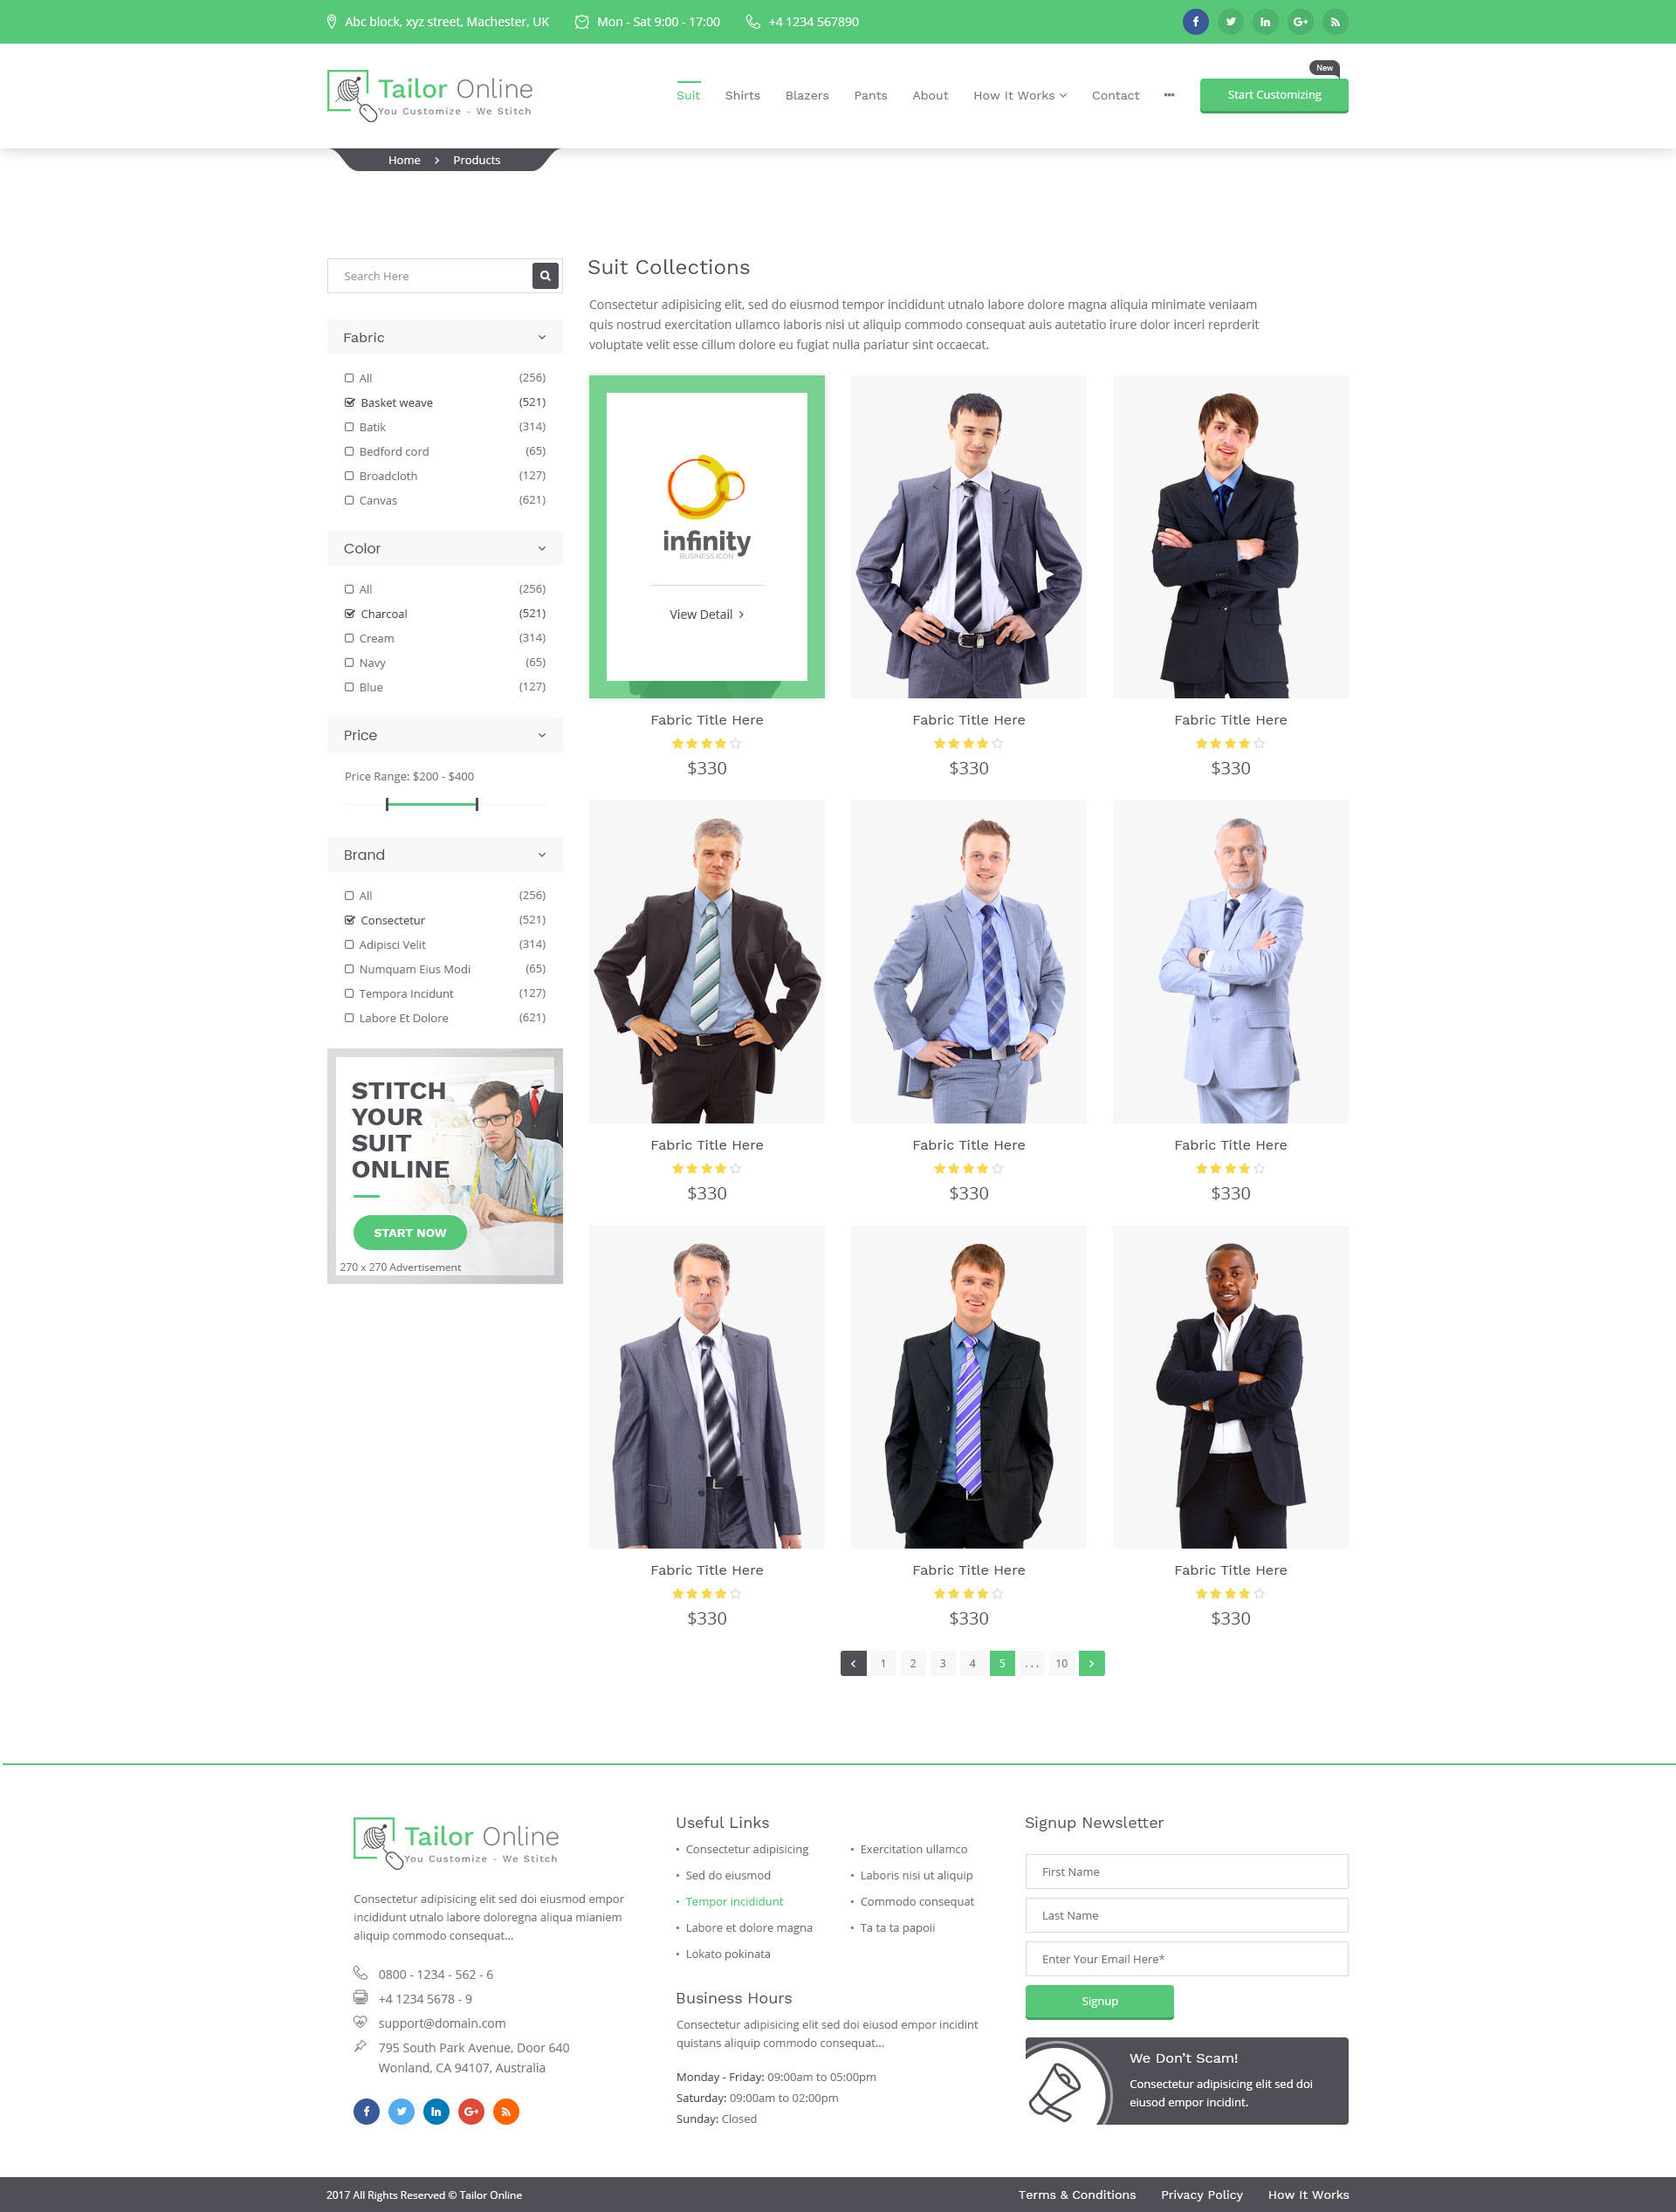 Custom Tailoring and Clothing Store | Tailors Online  PSD